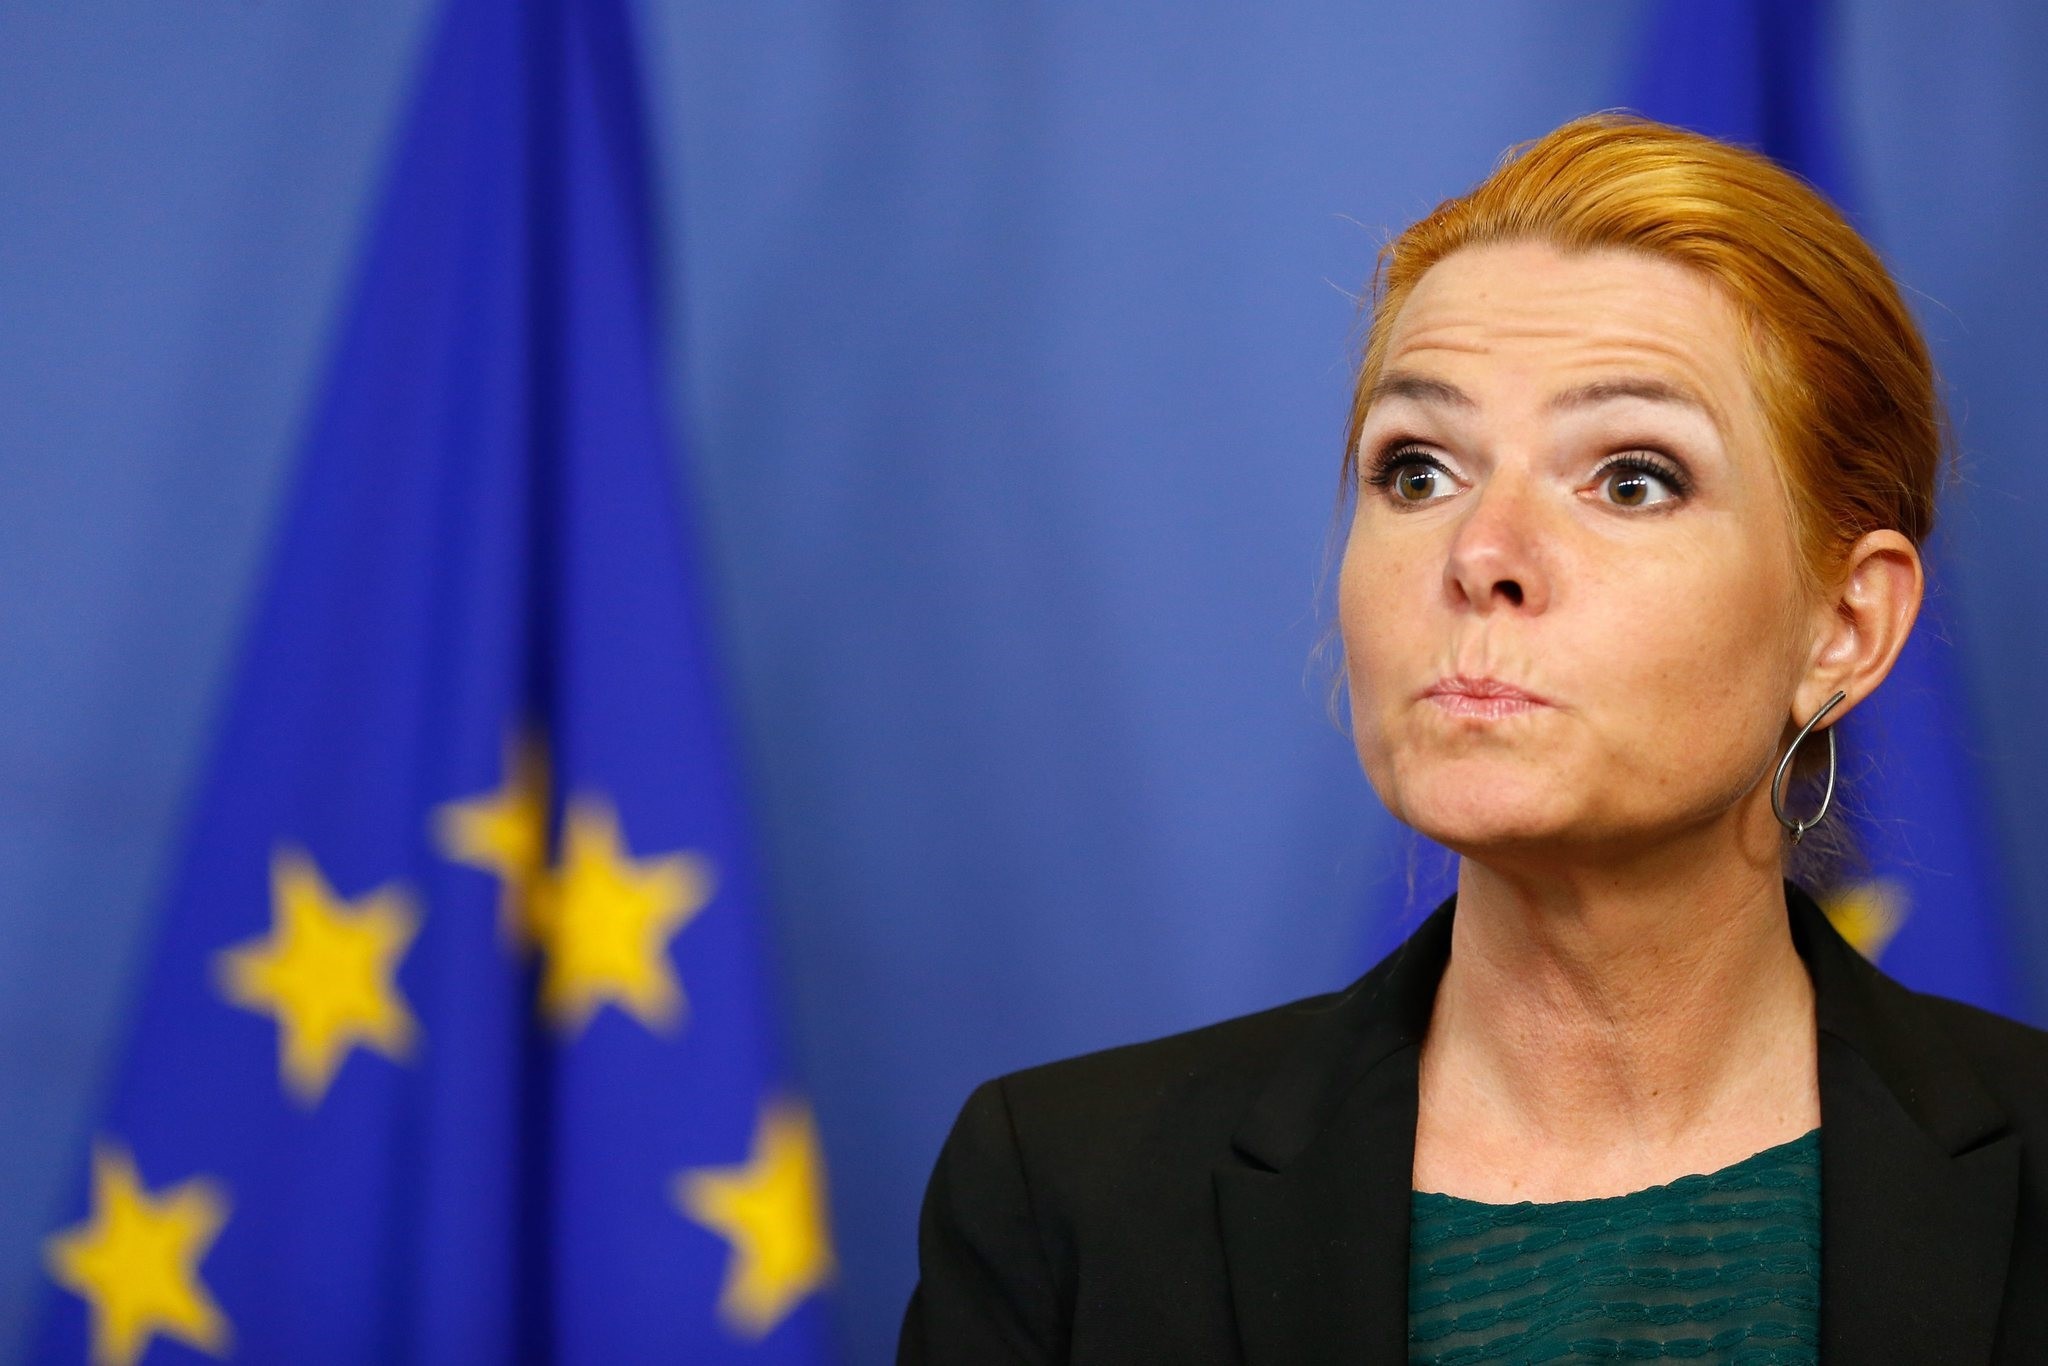 Danish Minister for Immigration, Integration and Housing Inger Stojberg during a press conference at the EU Commission in Brussels, Belgium, 06 January 2016. (EPA Photo)